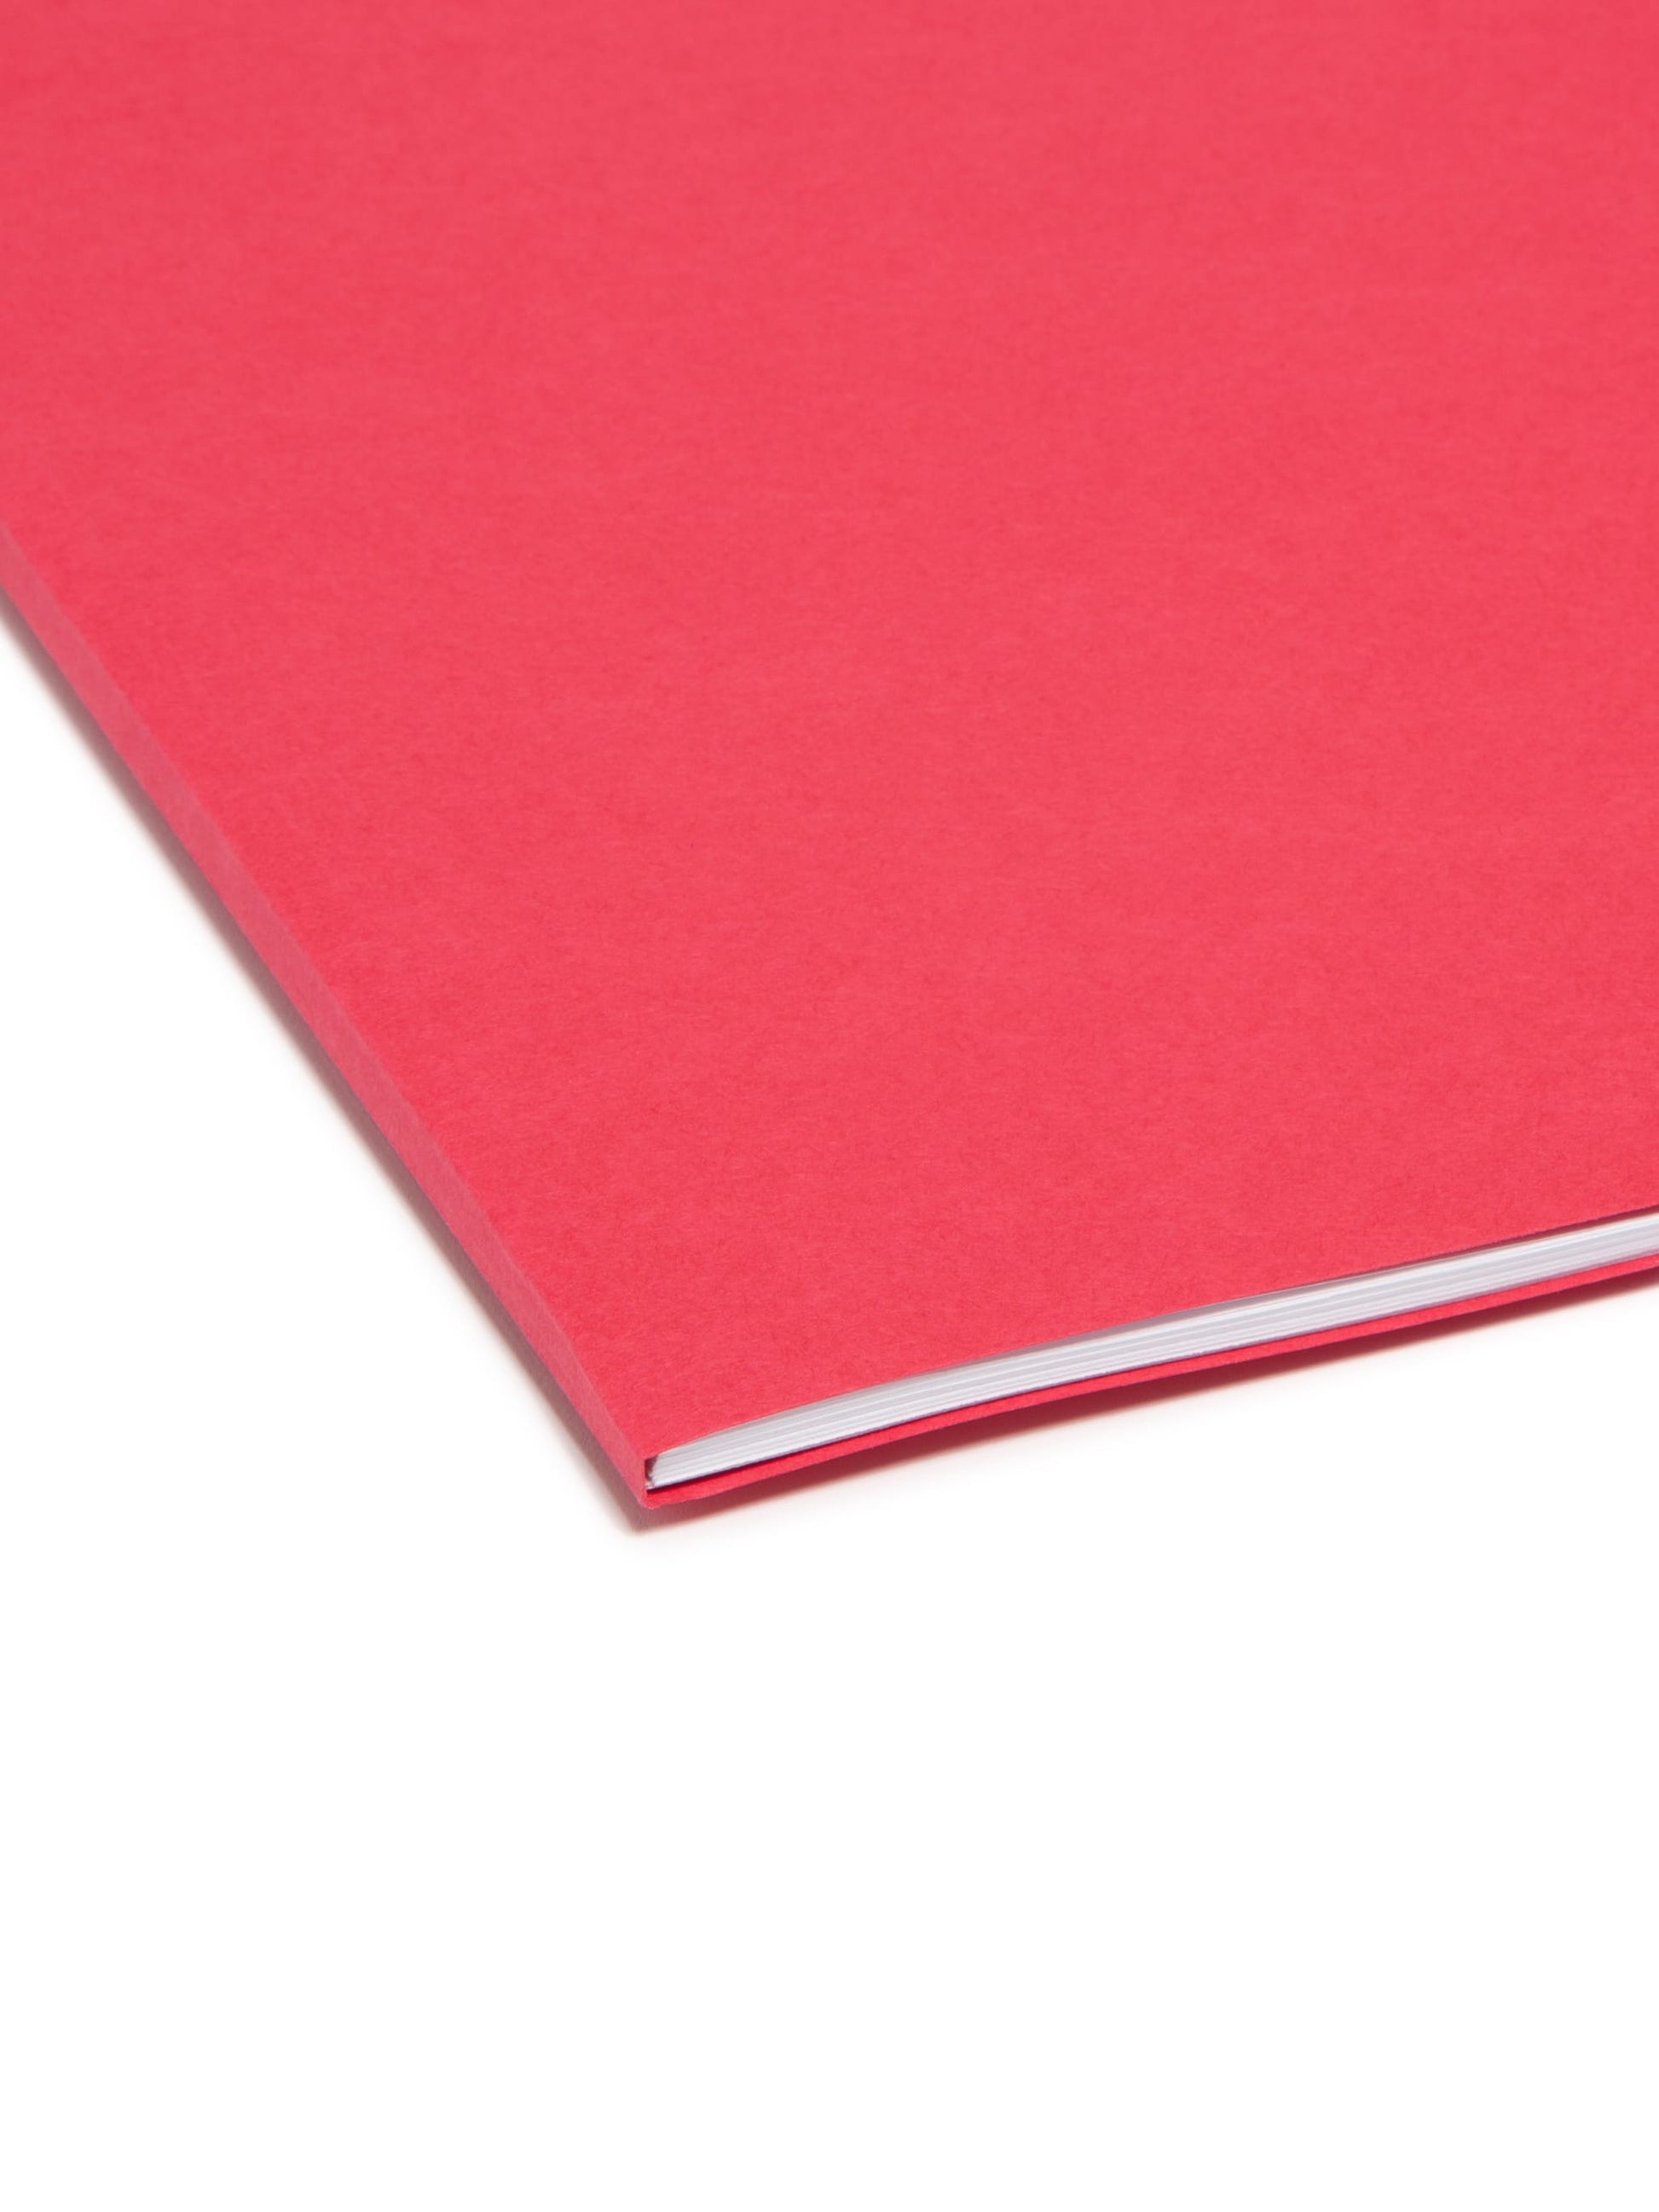 Reinforced Tab File Folders, 1/3-Cut Tab, Red Color, Letter Size, Set of 100, 086486127349